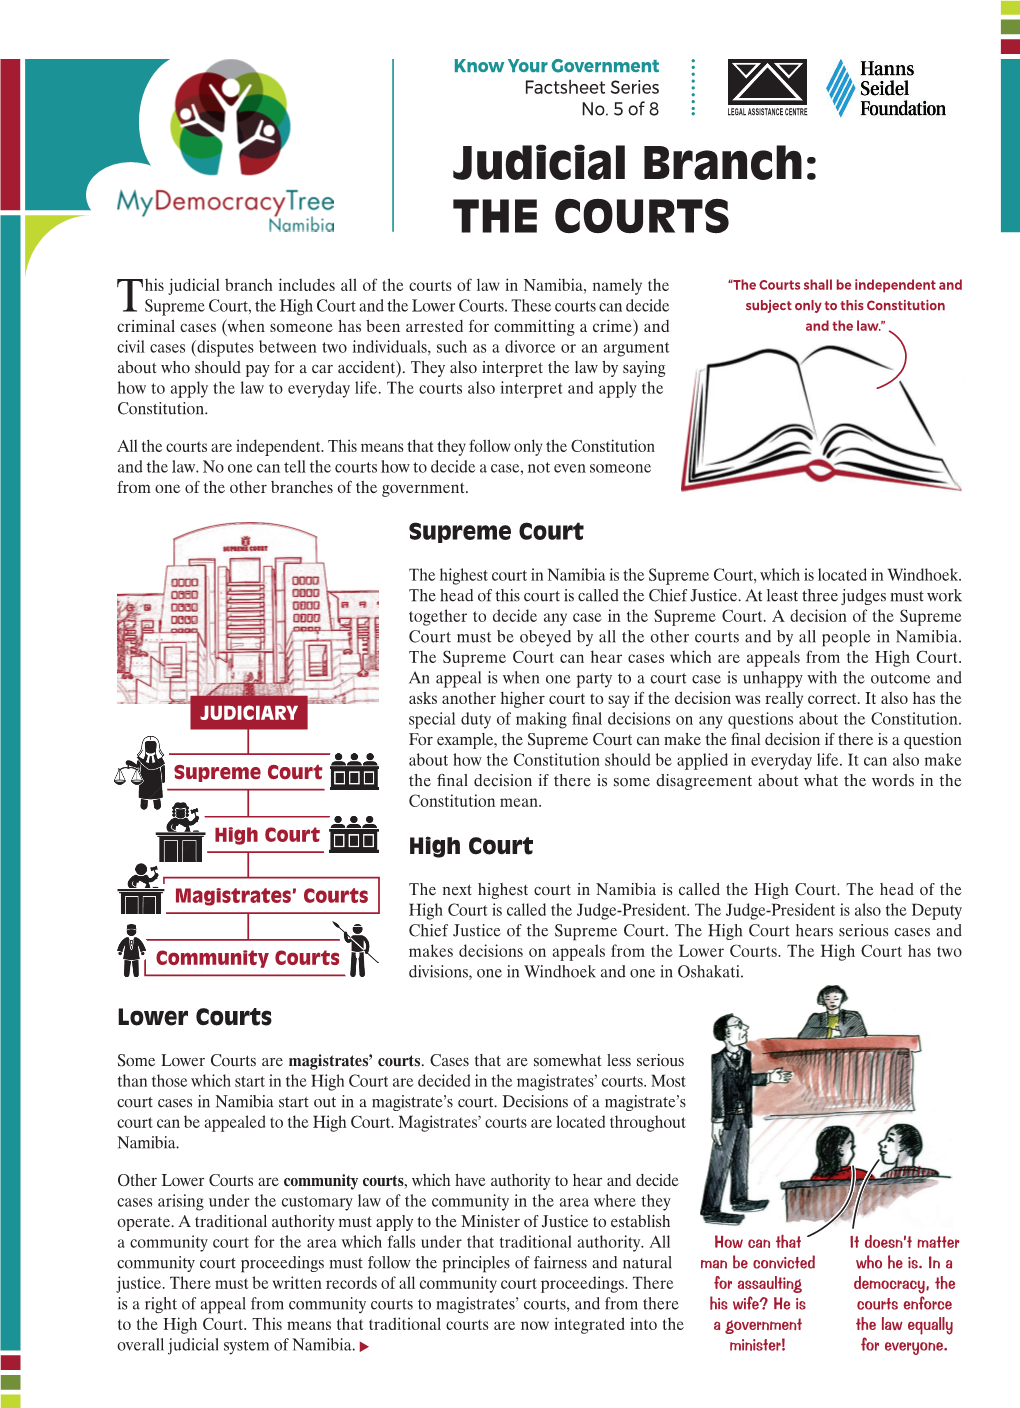 Judicial Branch: the COURTS